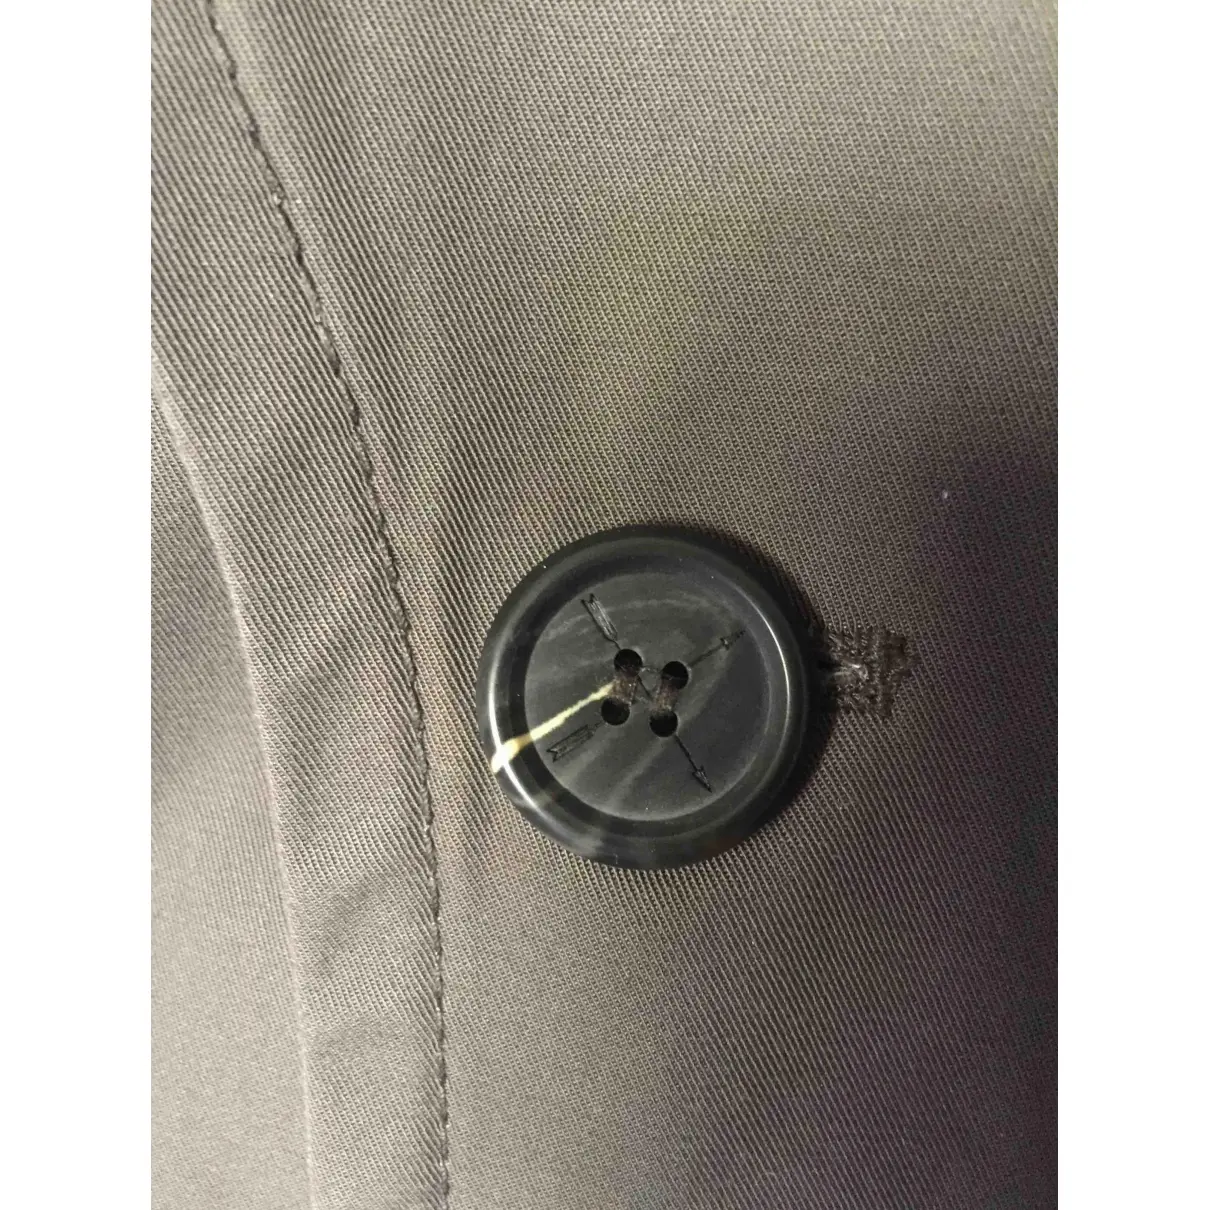 Viktor & Rolf by H&M Trenchcoat for sale